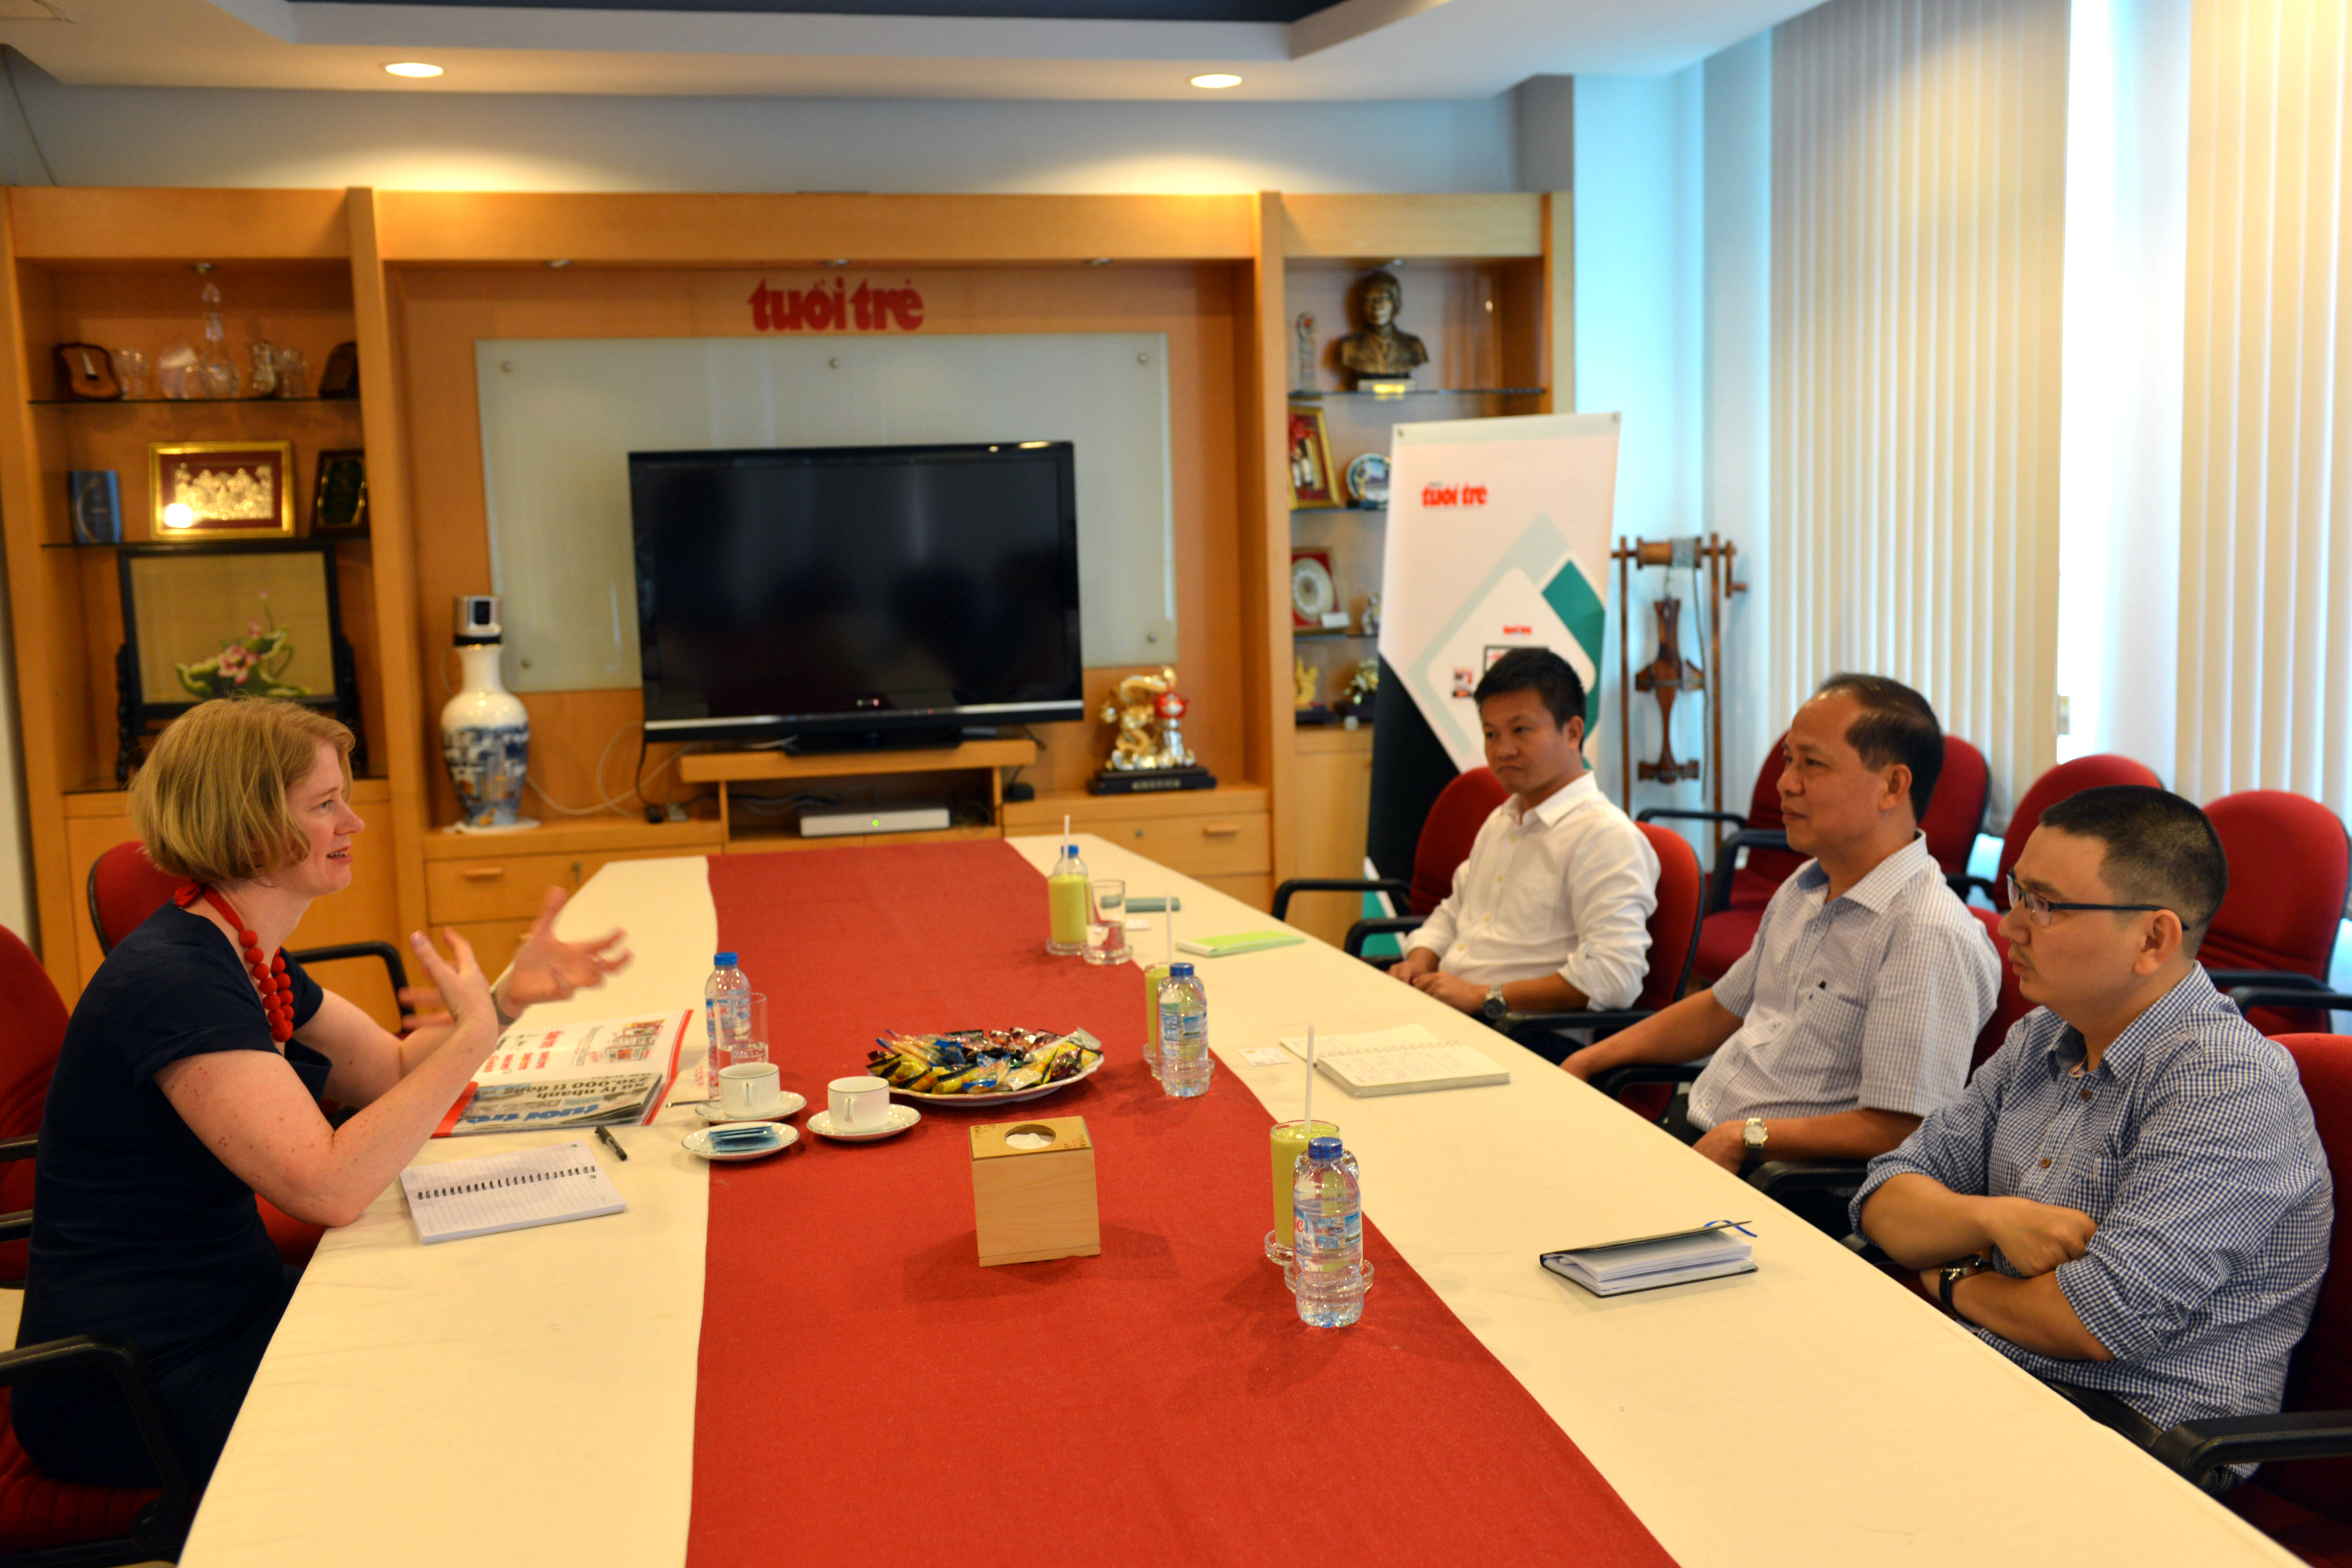 New Zealand’s Ambassador to Vietnam Wendy Matthews (L) is pictured during the meeting at Tuoi Tre head office in Ho Chi Minh City on August 29, 2017.